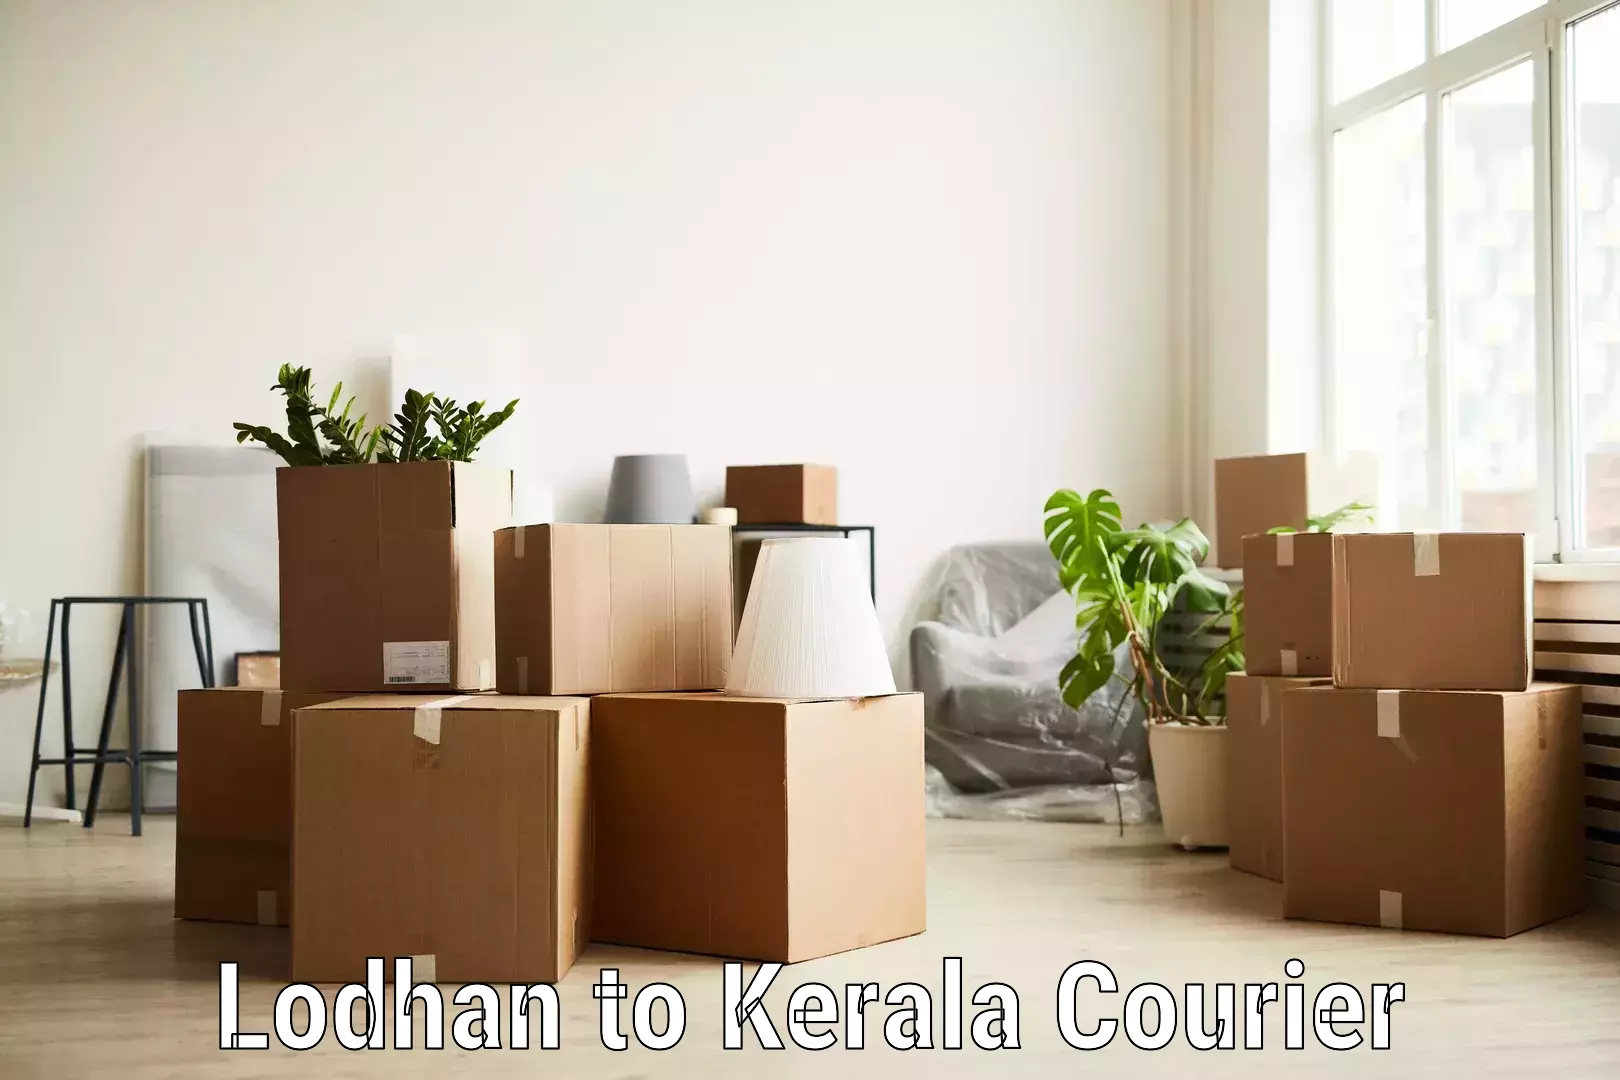 24/7 shipping services in Lodhan to Kerala